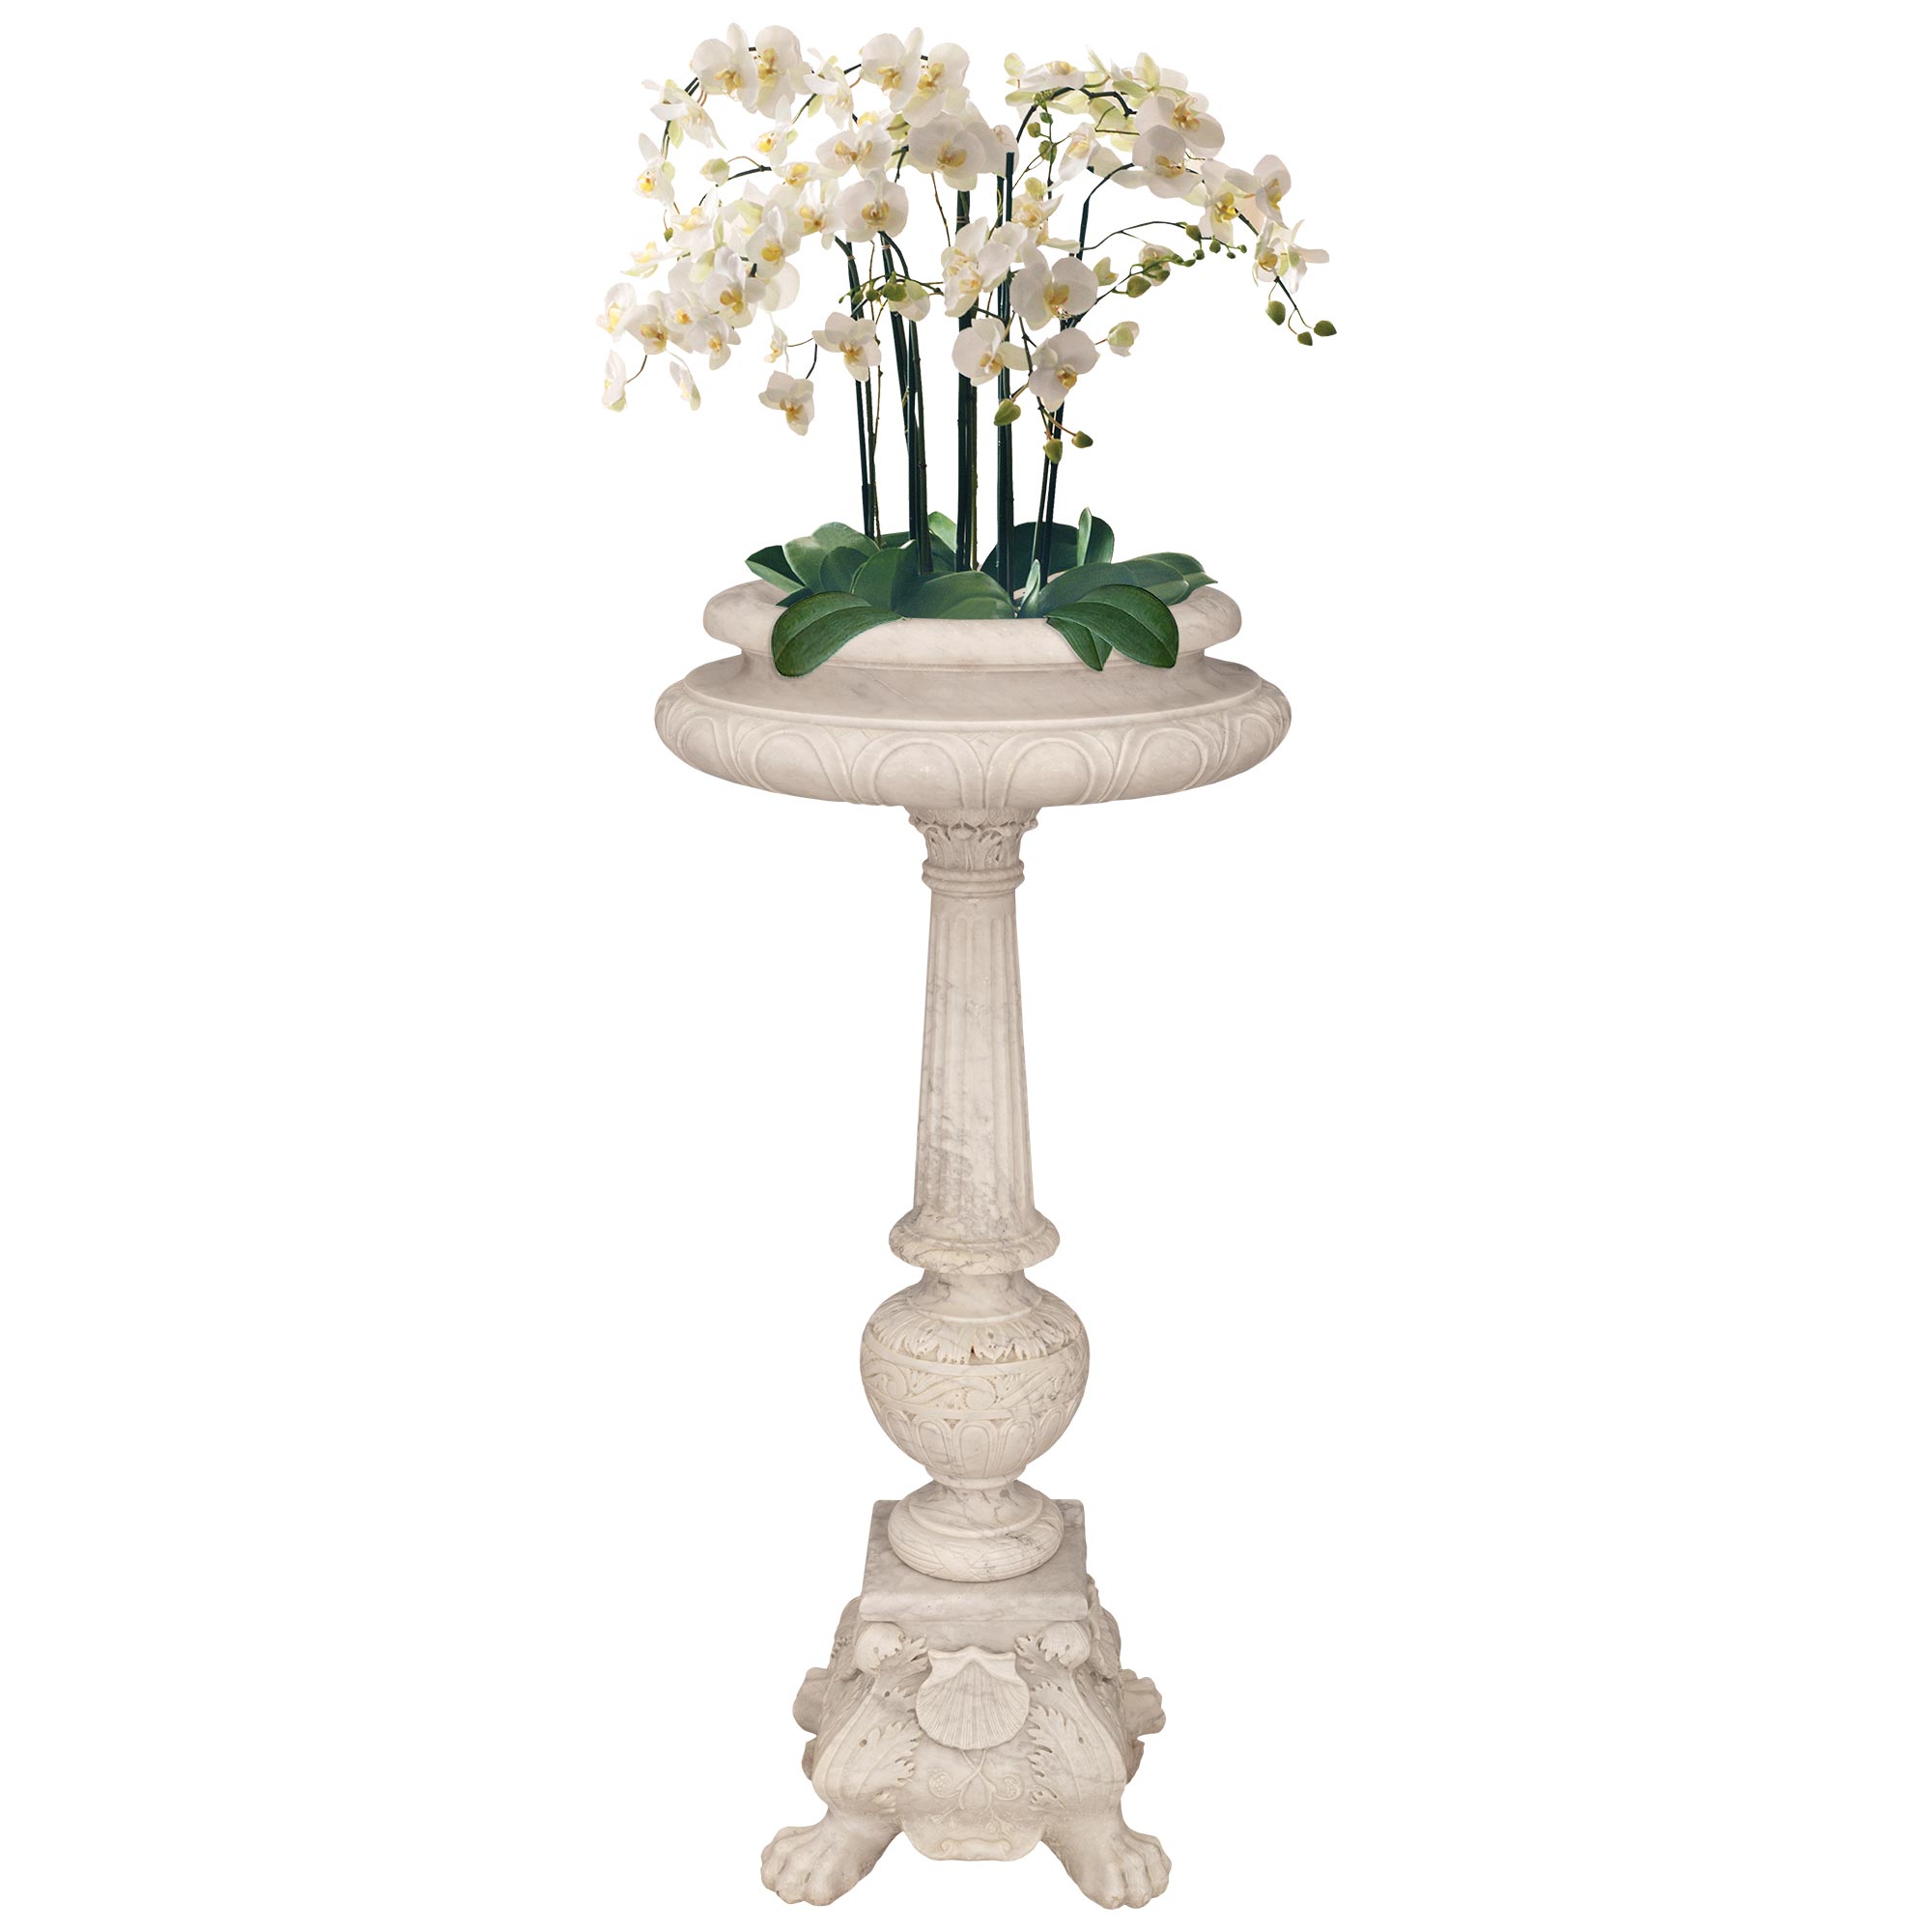 A striking and most elegant Italian 19th century Louis XVI st. white Carrara marble bird bath/planter. The planter is raised by a square base with handsome paw feet below large richly sculpted acanthus leaves with fine scrolled foliate designs and